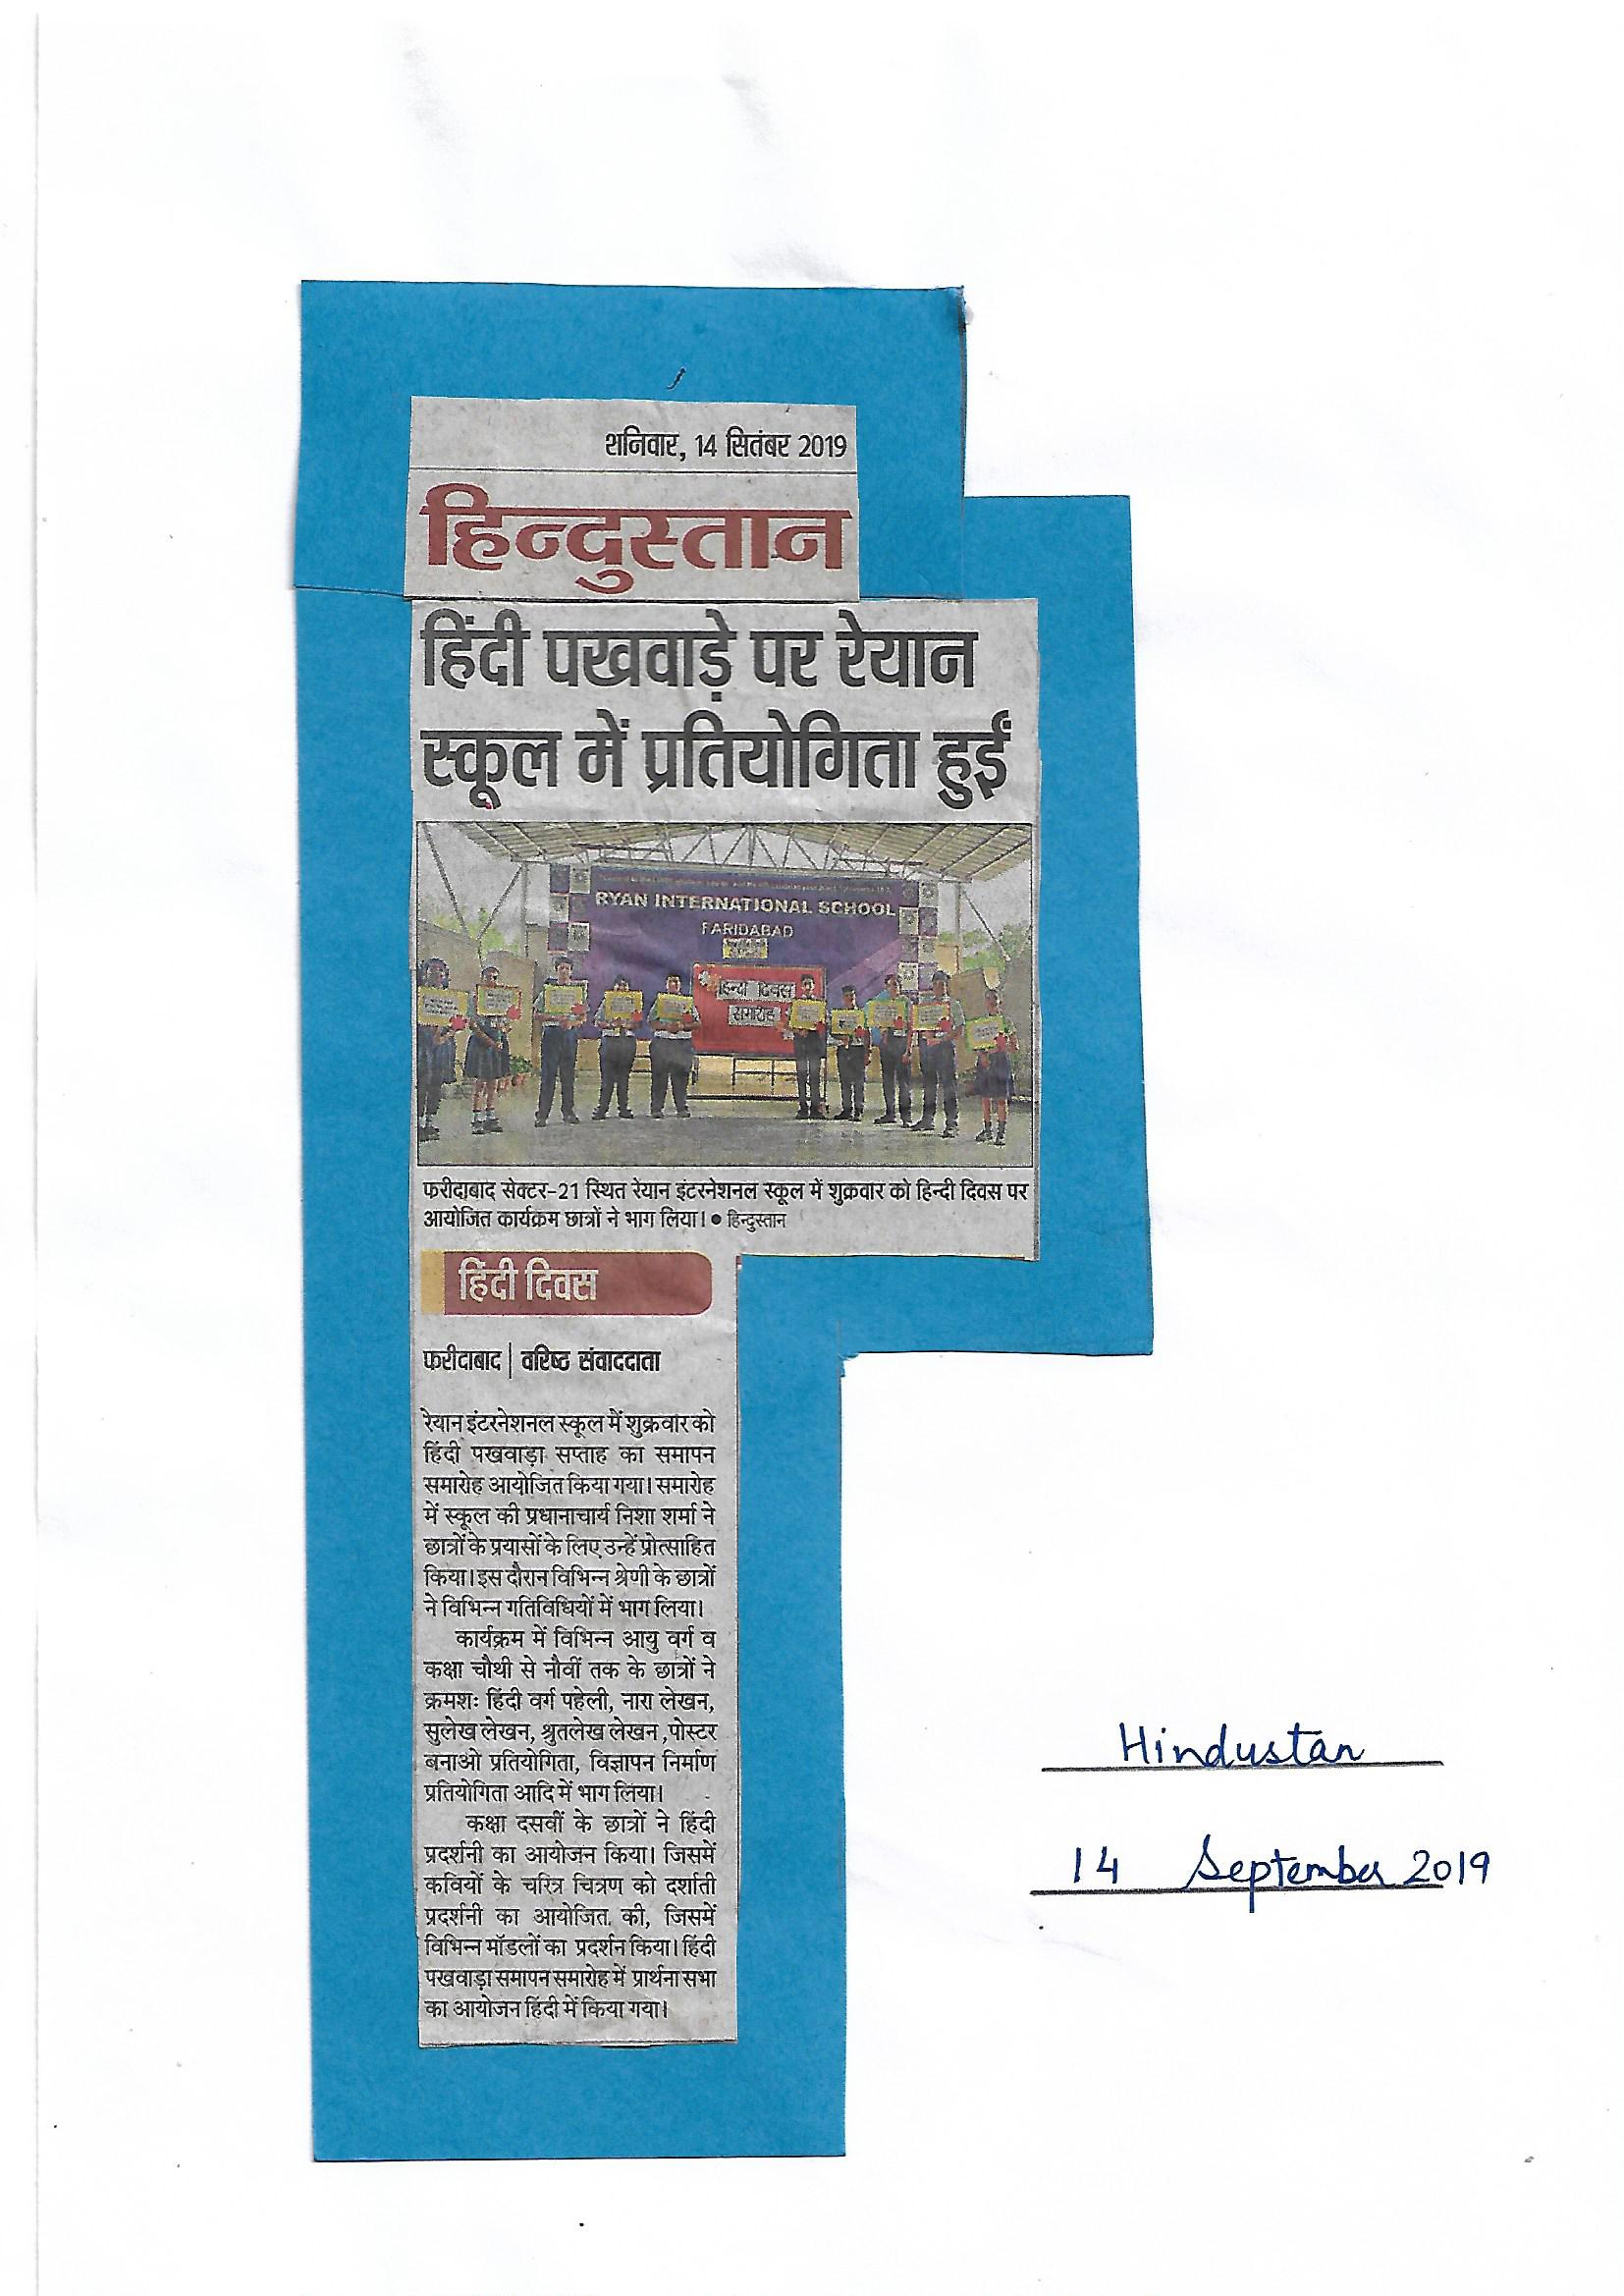 Ryan International School Faridabad organises a competition in the school on the occasion of Hindi Day - Ryan International School, Faridabad